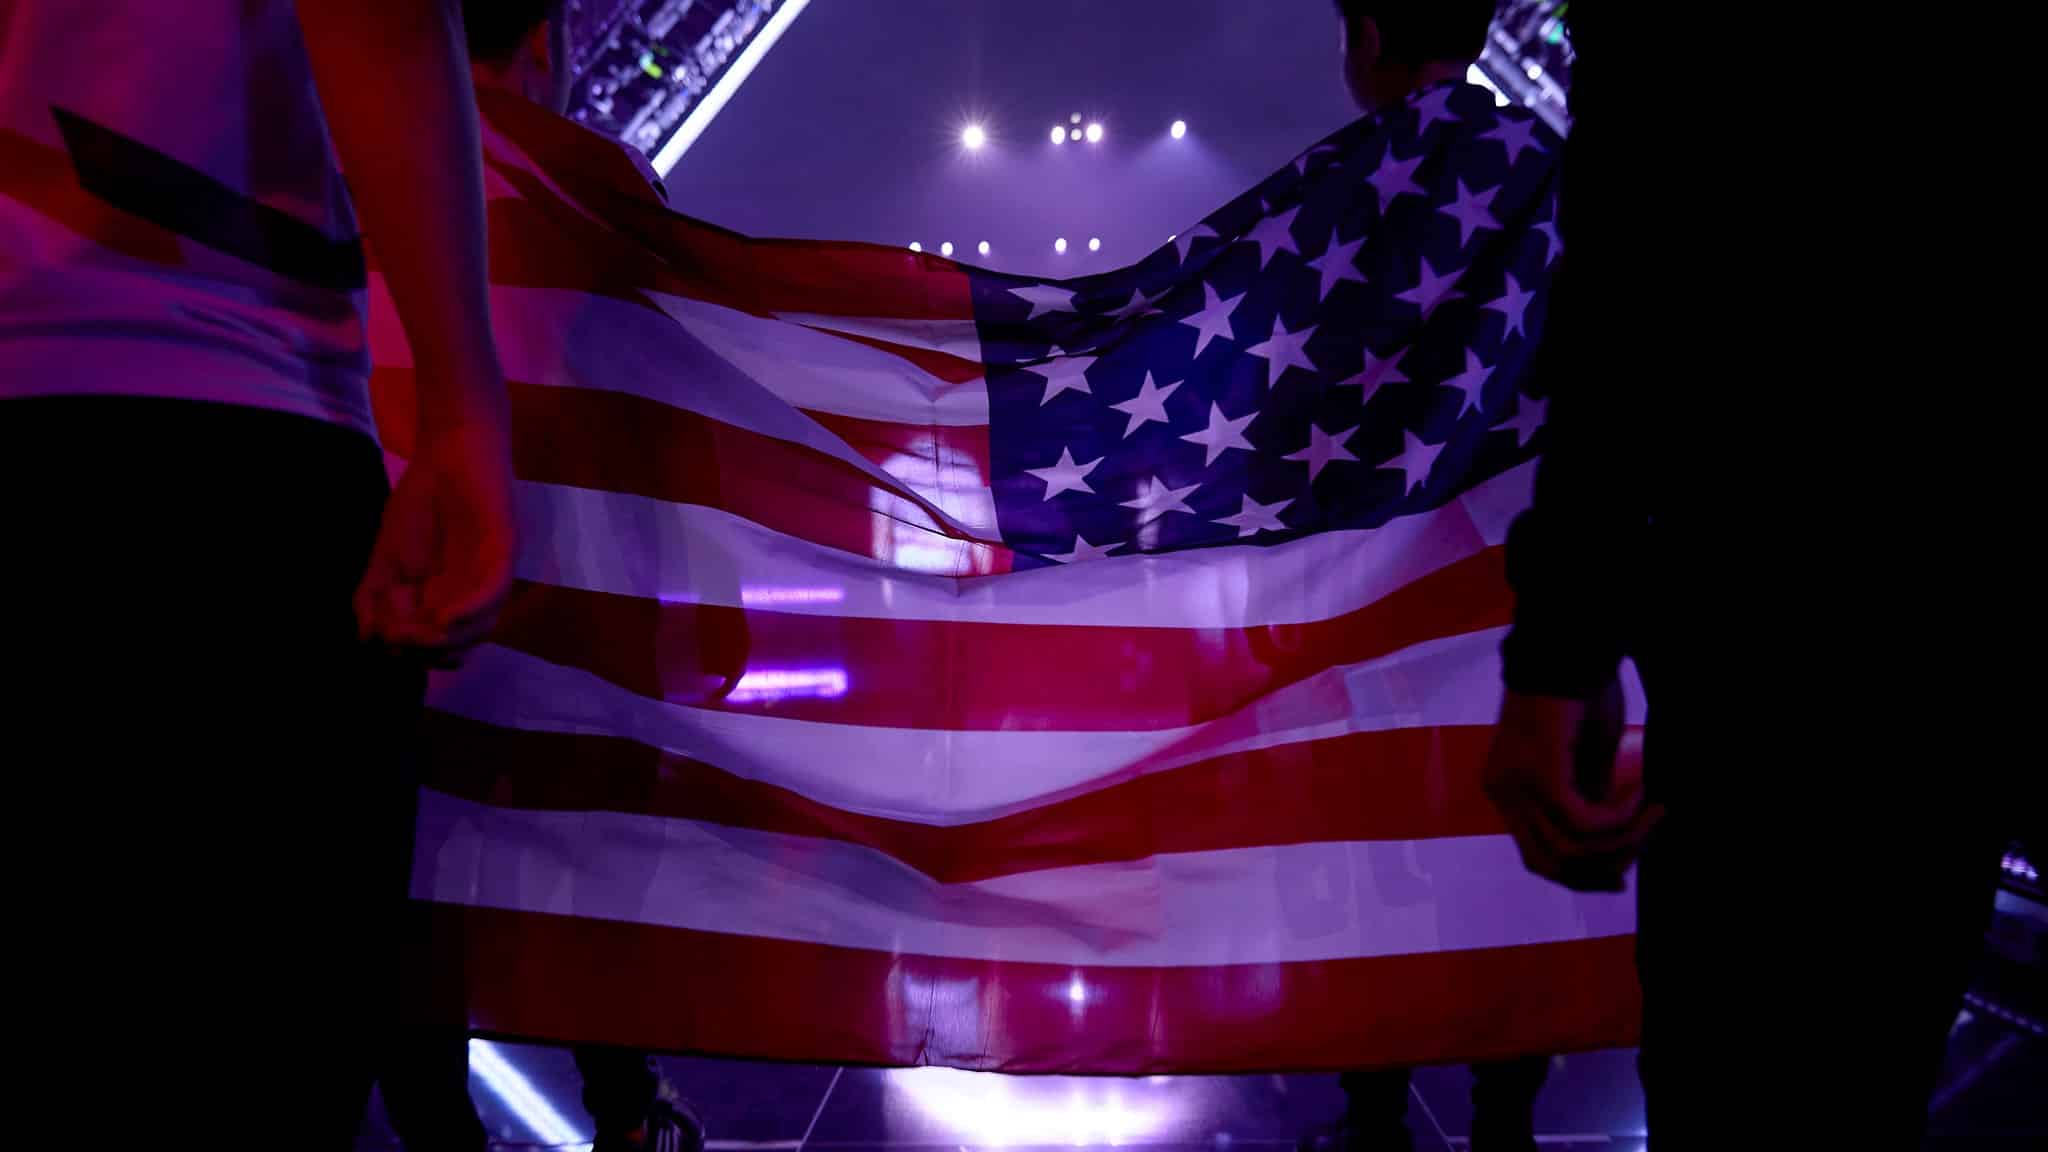 The America flag held between two players before they walk out on stage